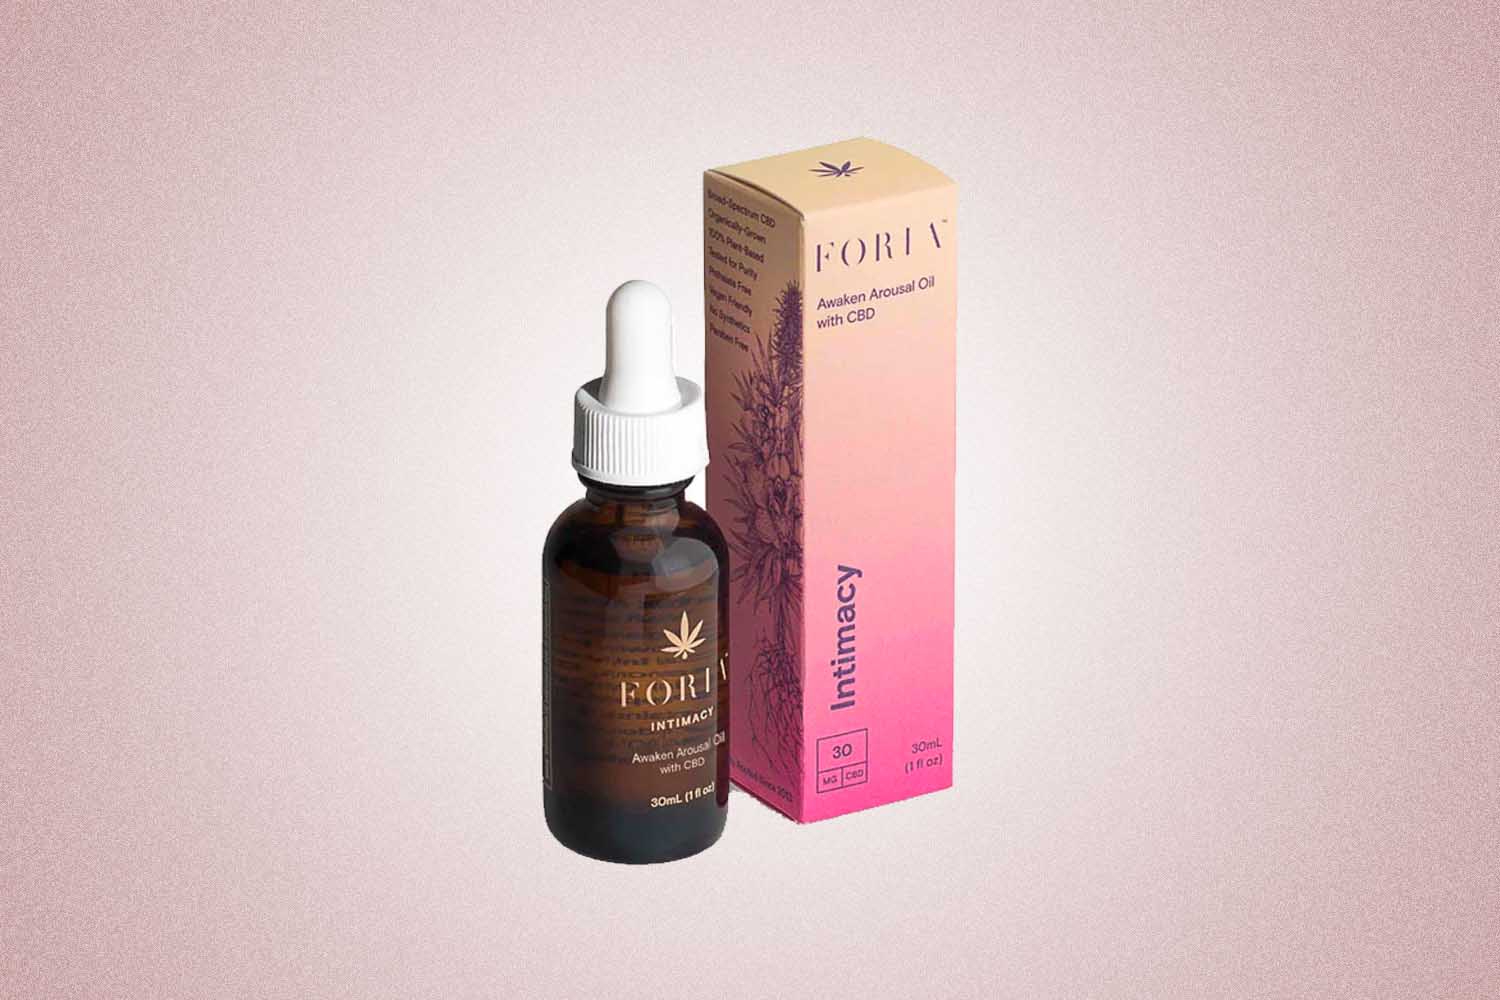 A tincture of Foria's Awaken Arousal Pil with CBD next to a pink box, a perfect Valentine's Day gift, on a pink background. 